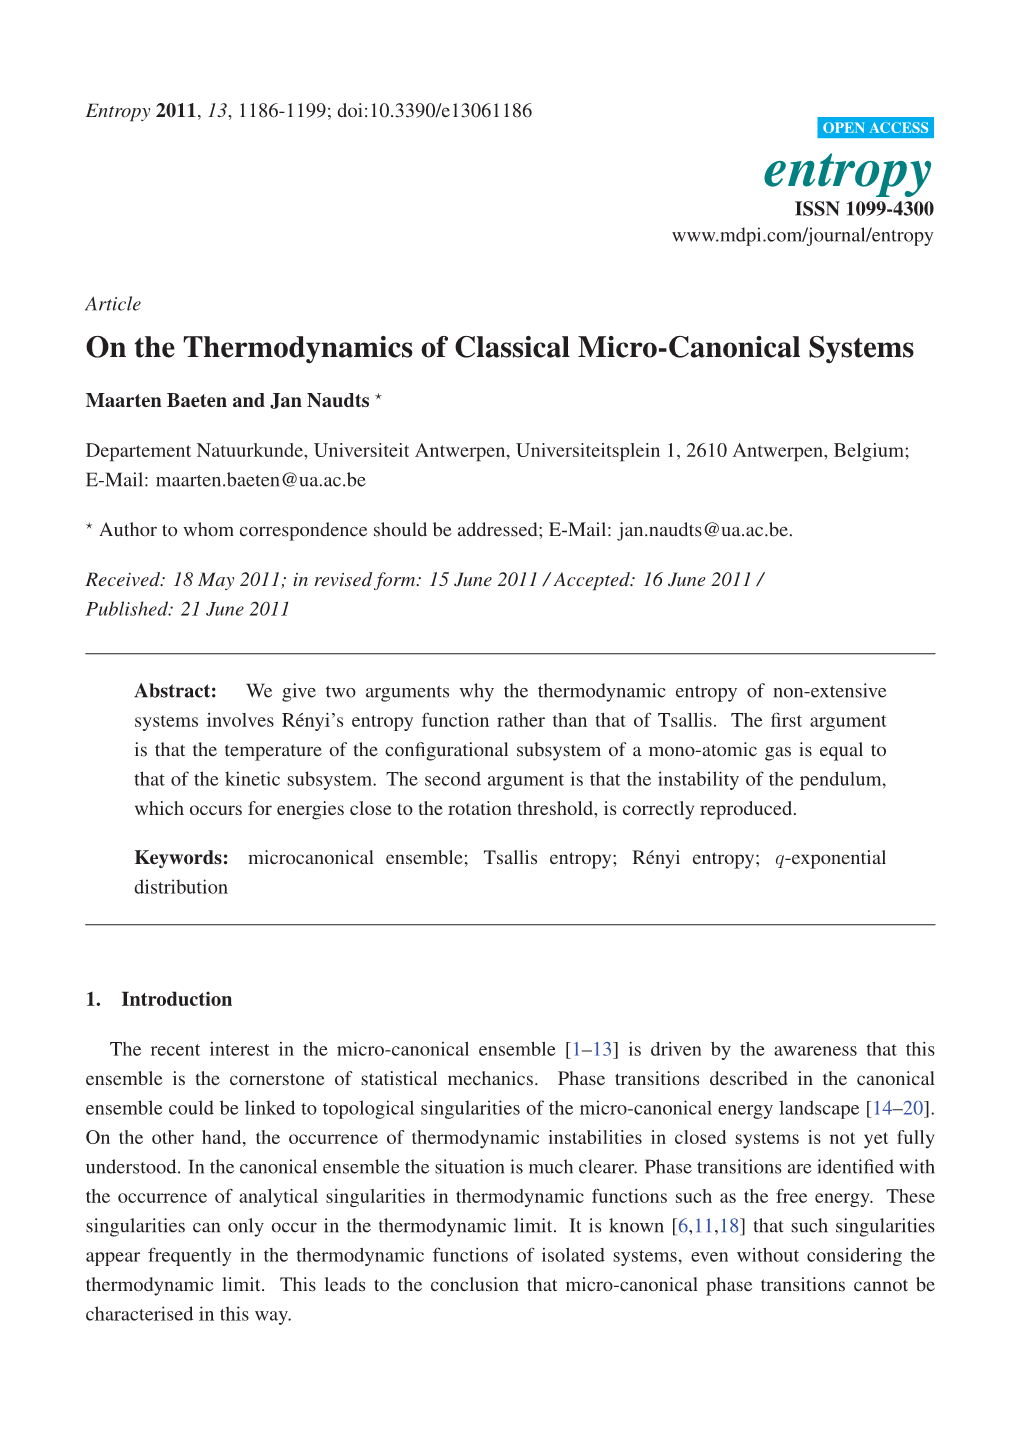 On the Thermodynamics of Classical Micro-Canonical Systems